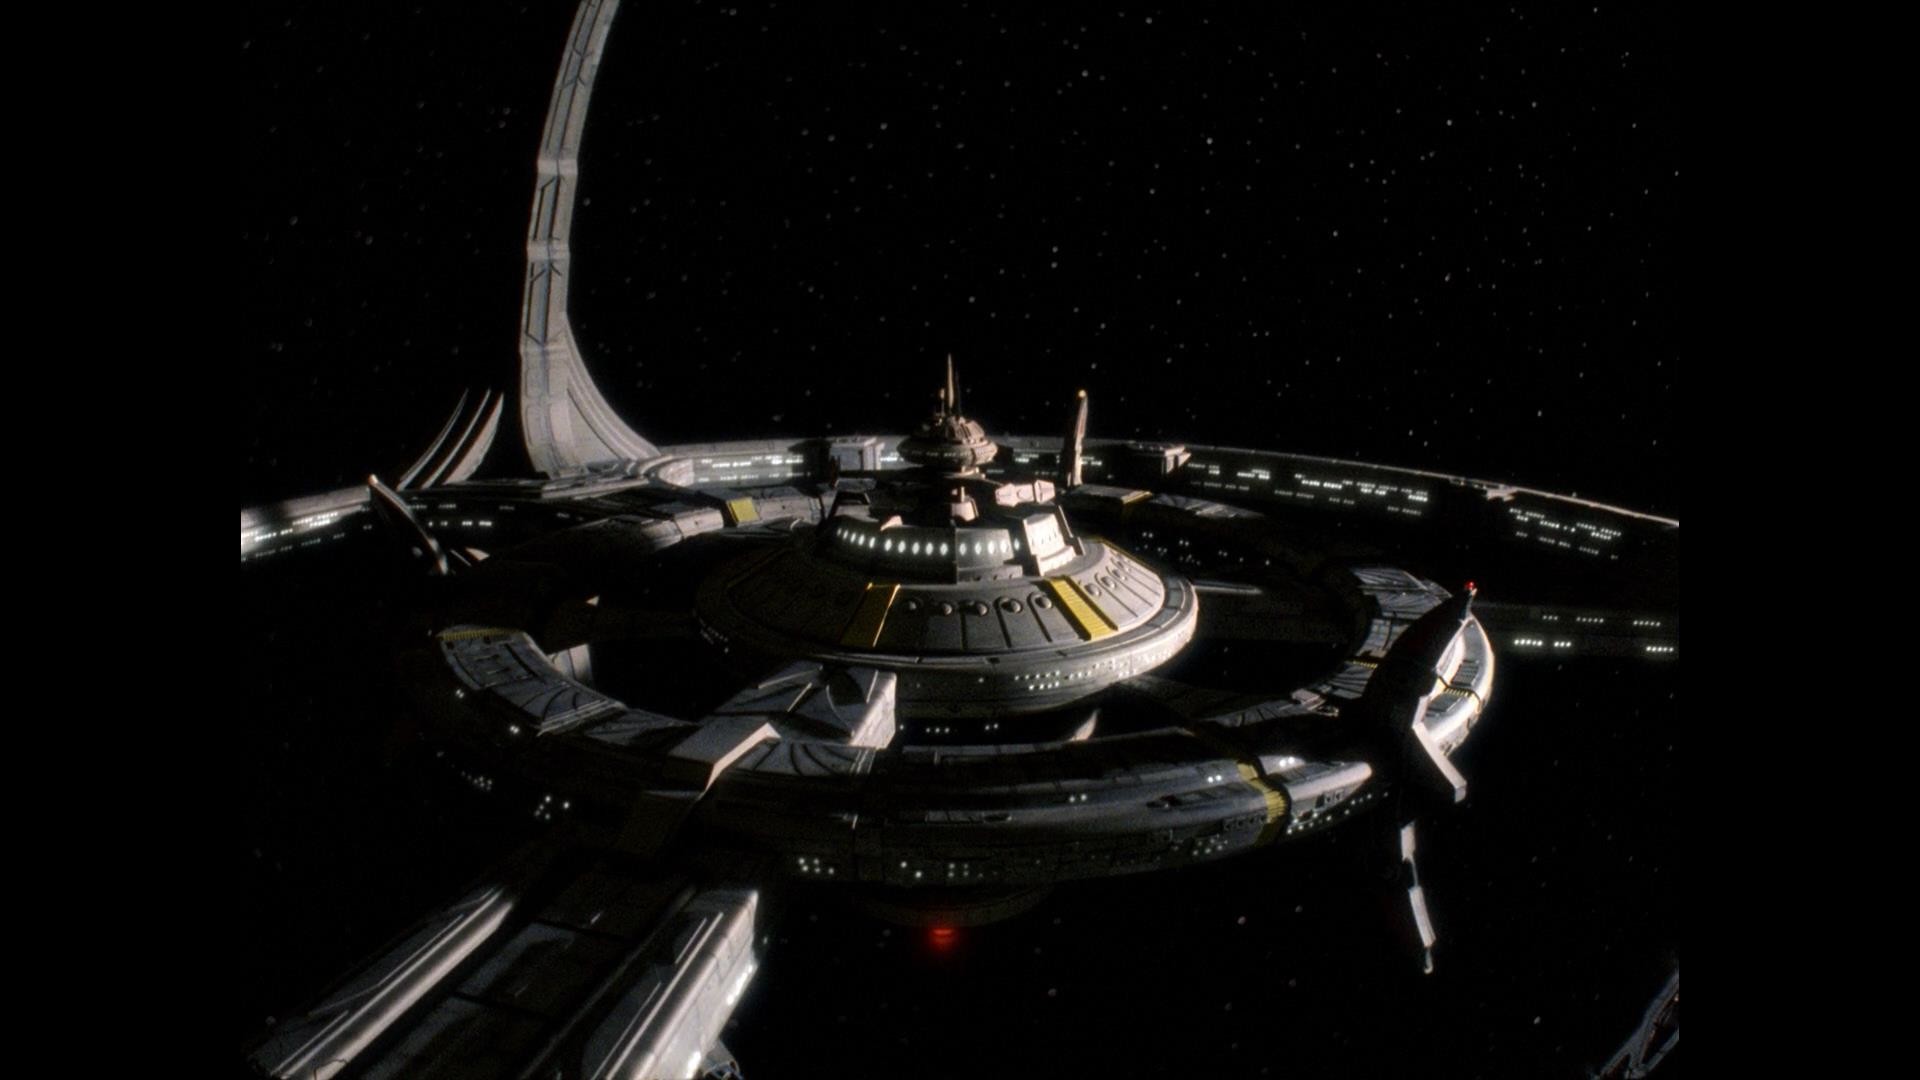 1920x1080 birthright_ds9_02_small